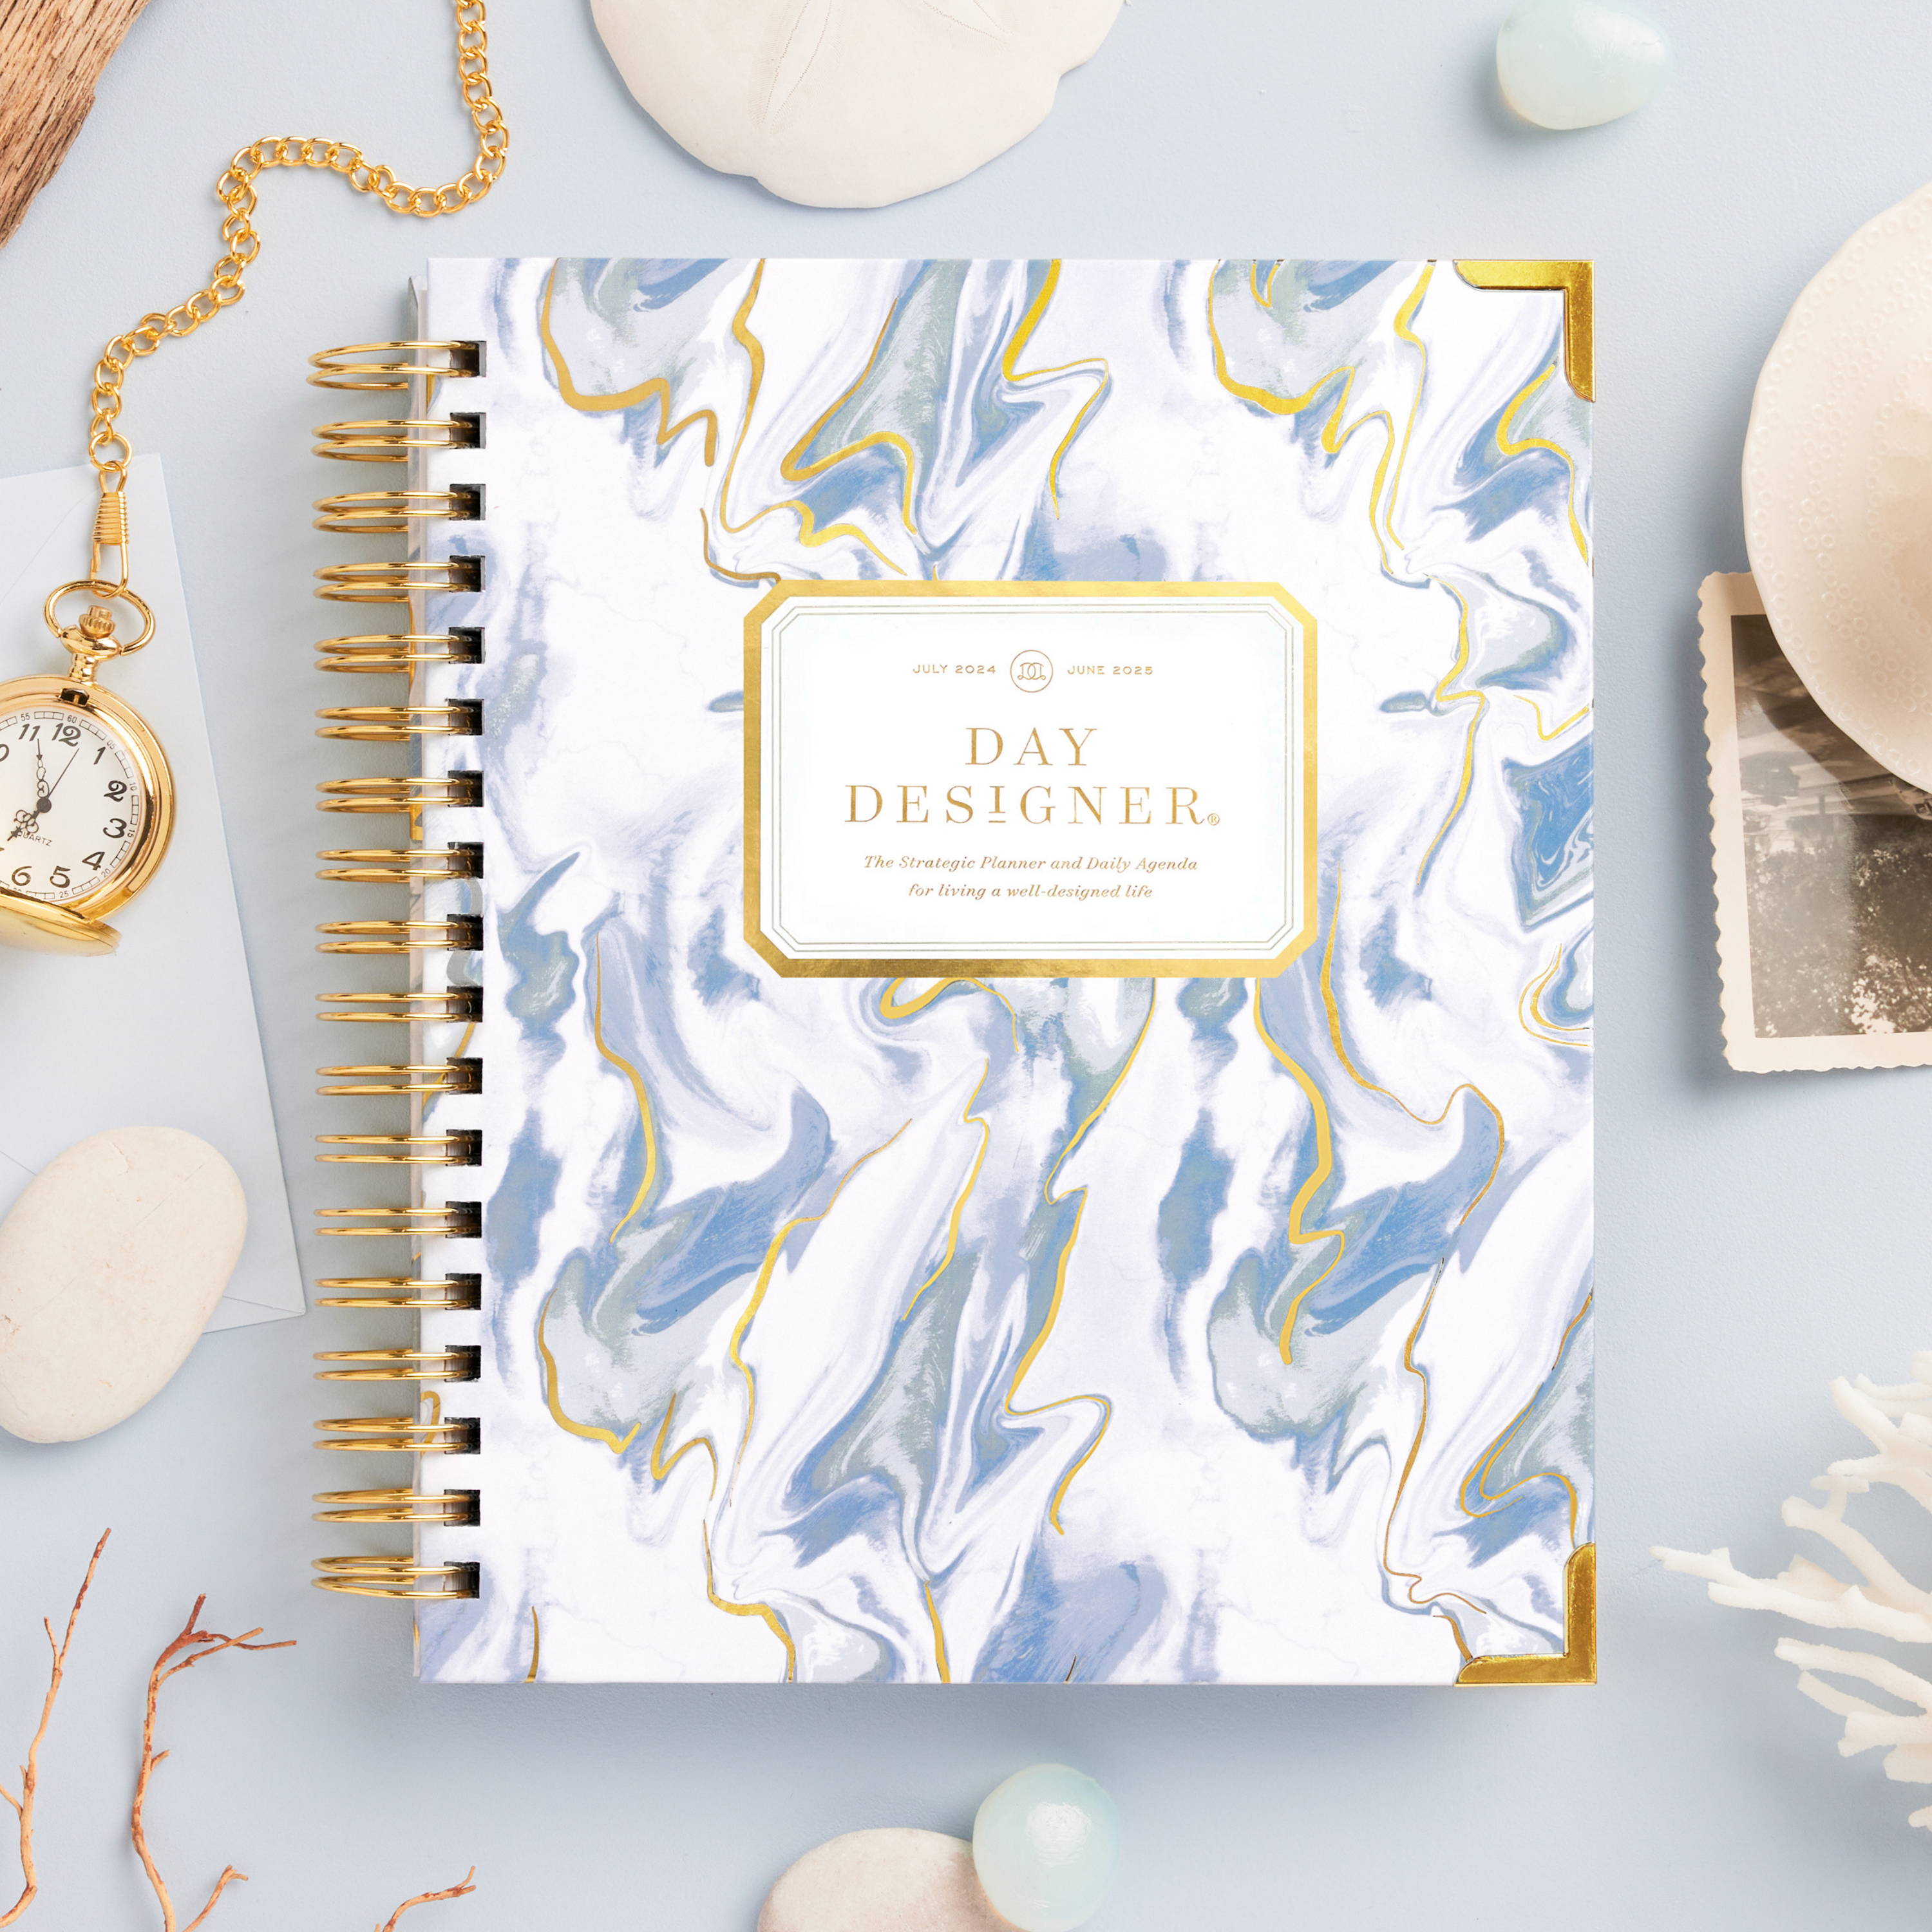 blue and white closed book planner with gold swirls on light blue background, gold stop watch with chain, sea shells, old photo, branches, 